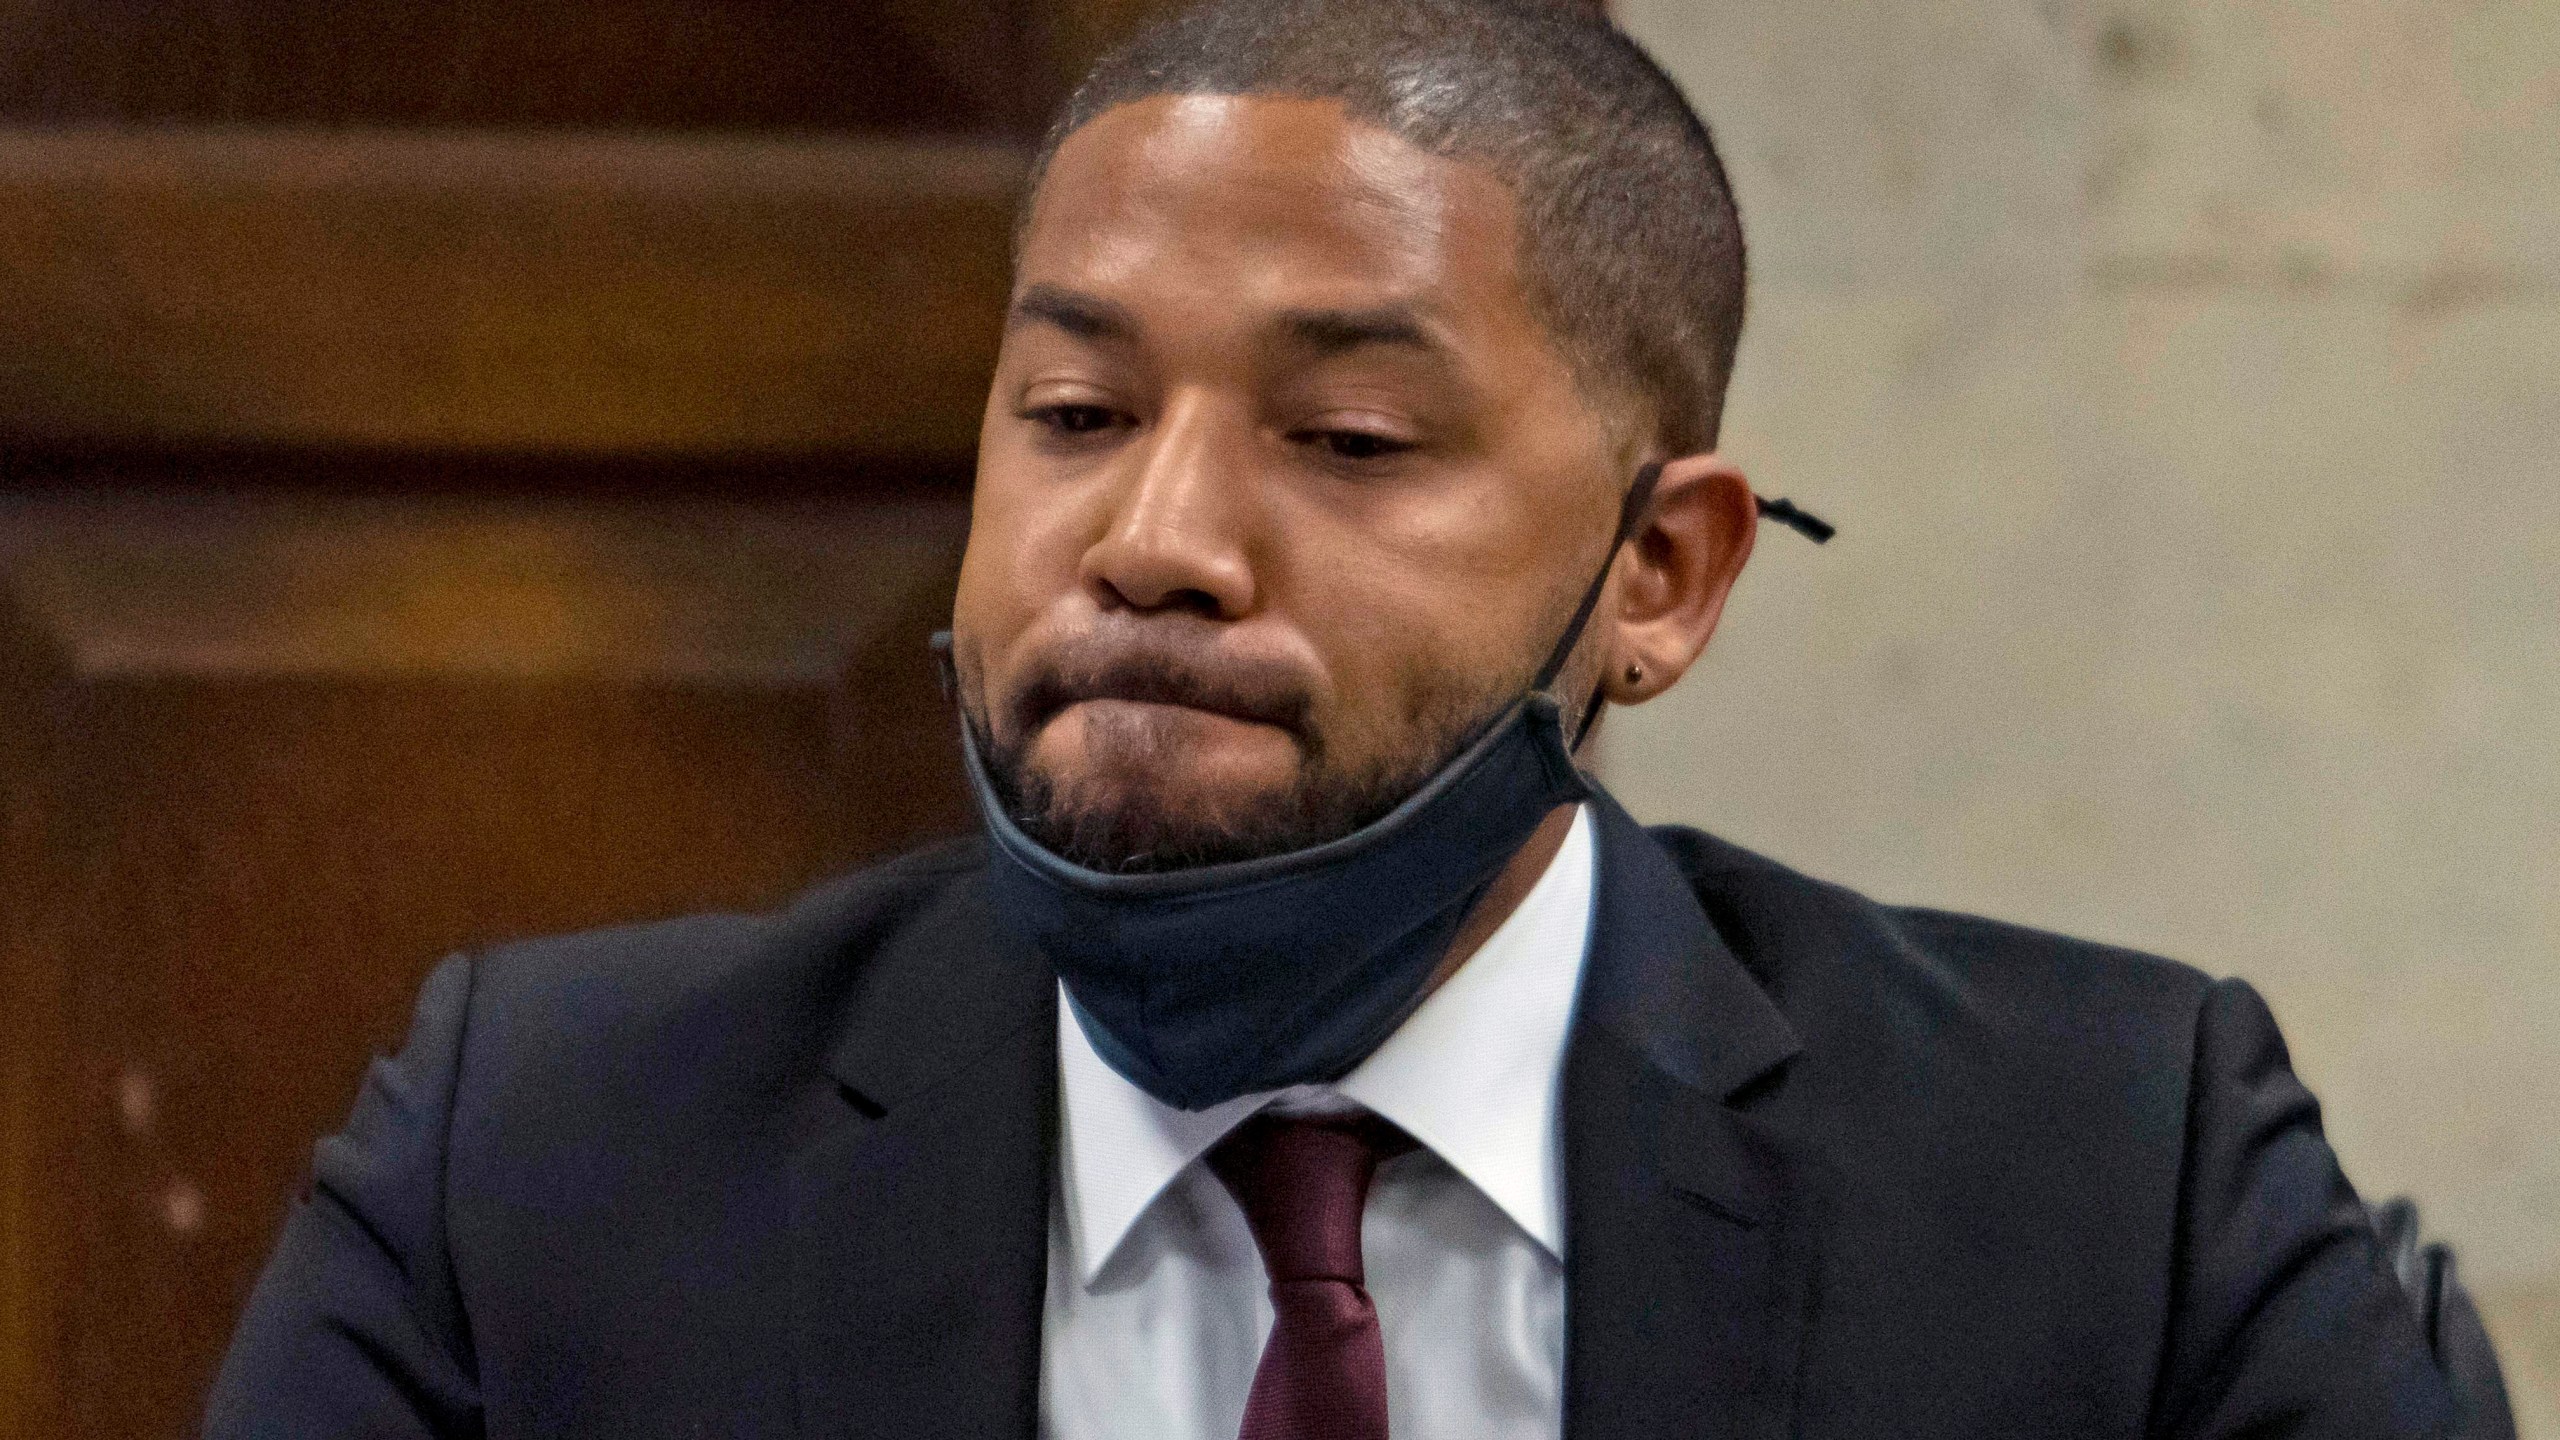 FILE - Actor Jussie Smollett listens as his sentence is read at the Leighton Criminal Court Building, March 10, 2022, in Chicago. The Illinois Supreme Court on Wednesday, March 27, 2024, accepted an appeal of Smollett's disorderly conduct conviction for staging a racist and homophobic attack against himself in 2019, then lying to Chicago police about it. (Brian Cassella/Chicago Tribune via AP, Pool, File)